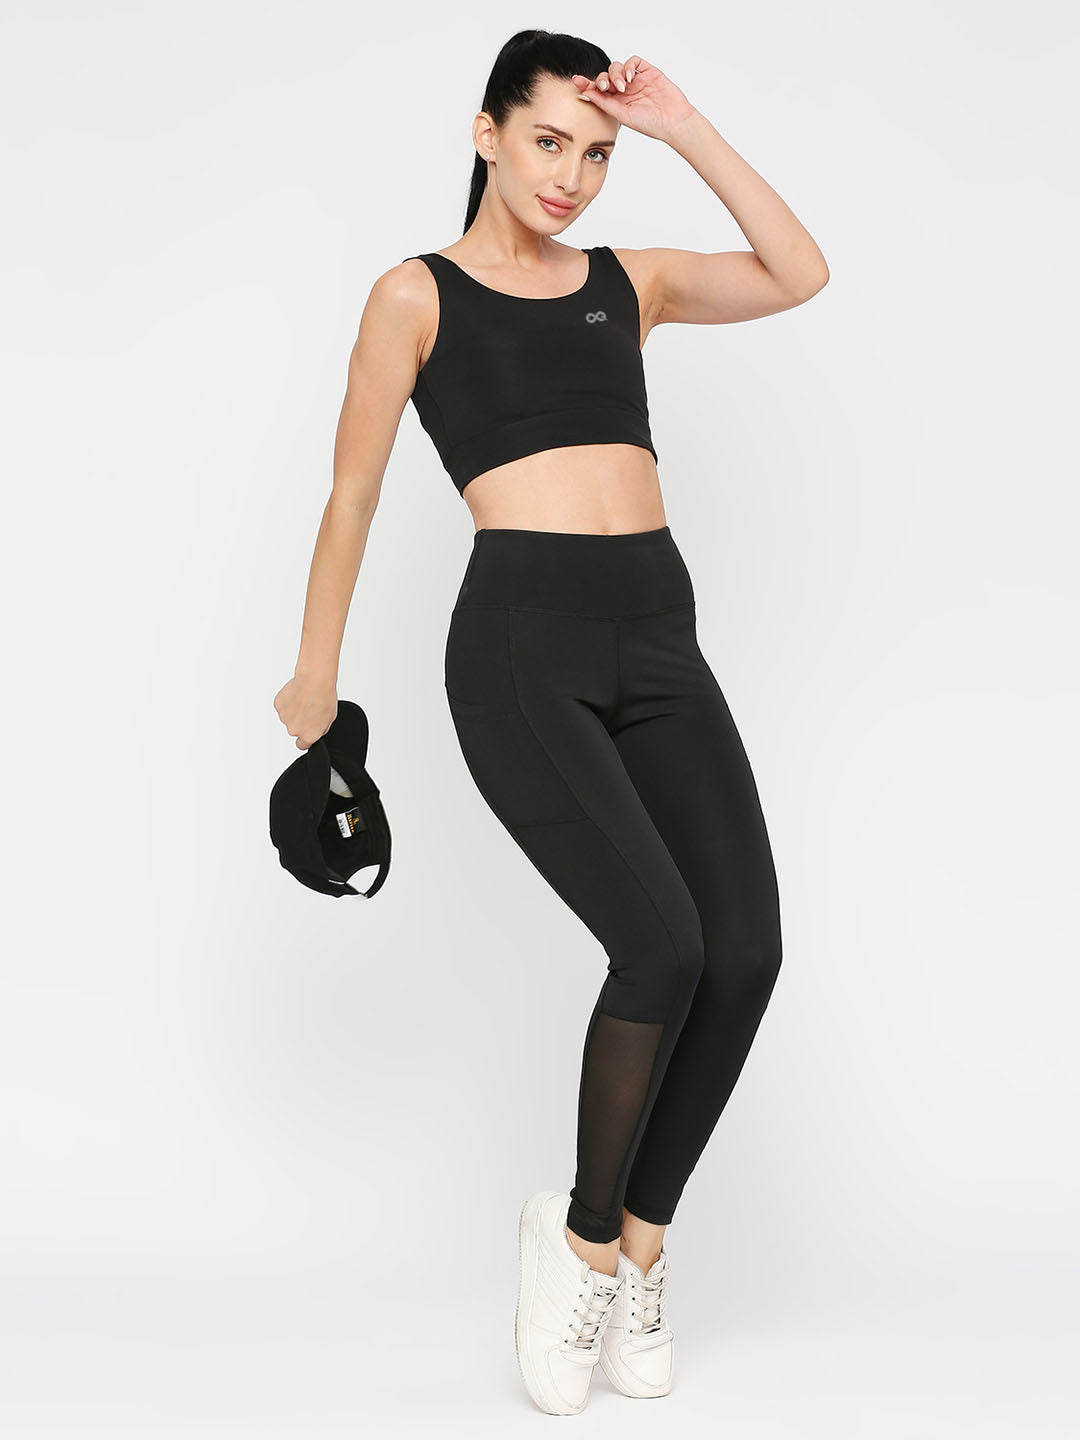 Buy Snug Fit Active Ankle Length Tights in Black Online India, Best Prices,  COD - Clovia - AB0049P13